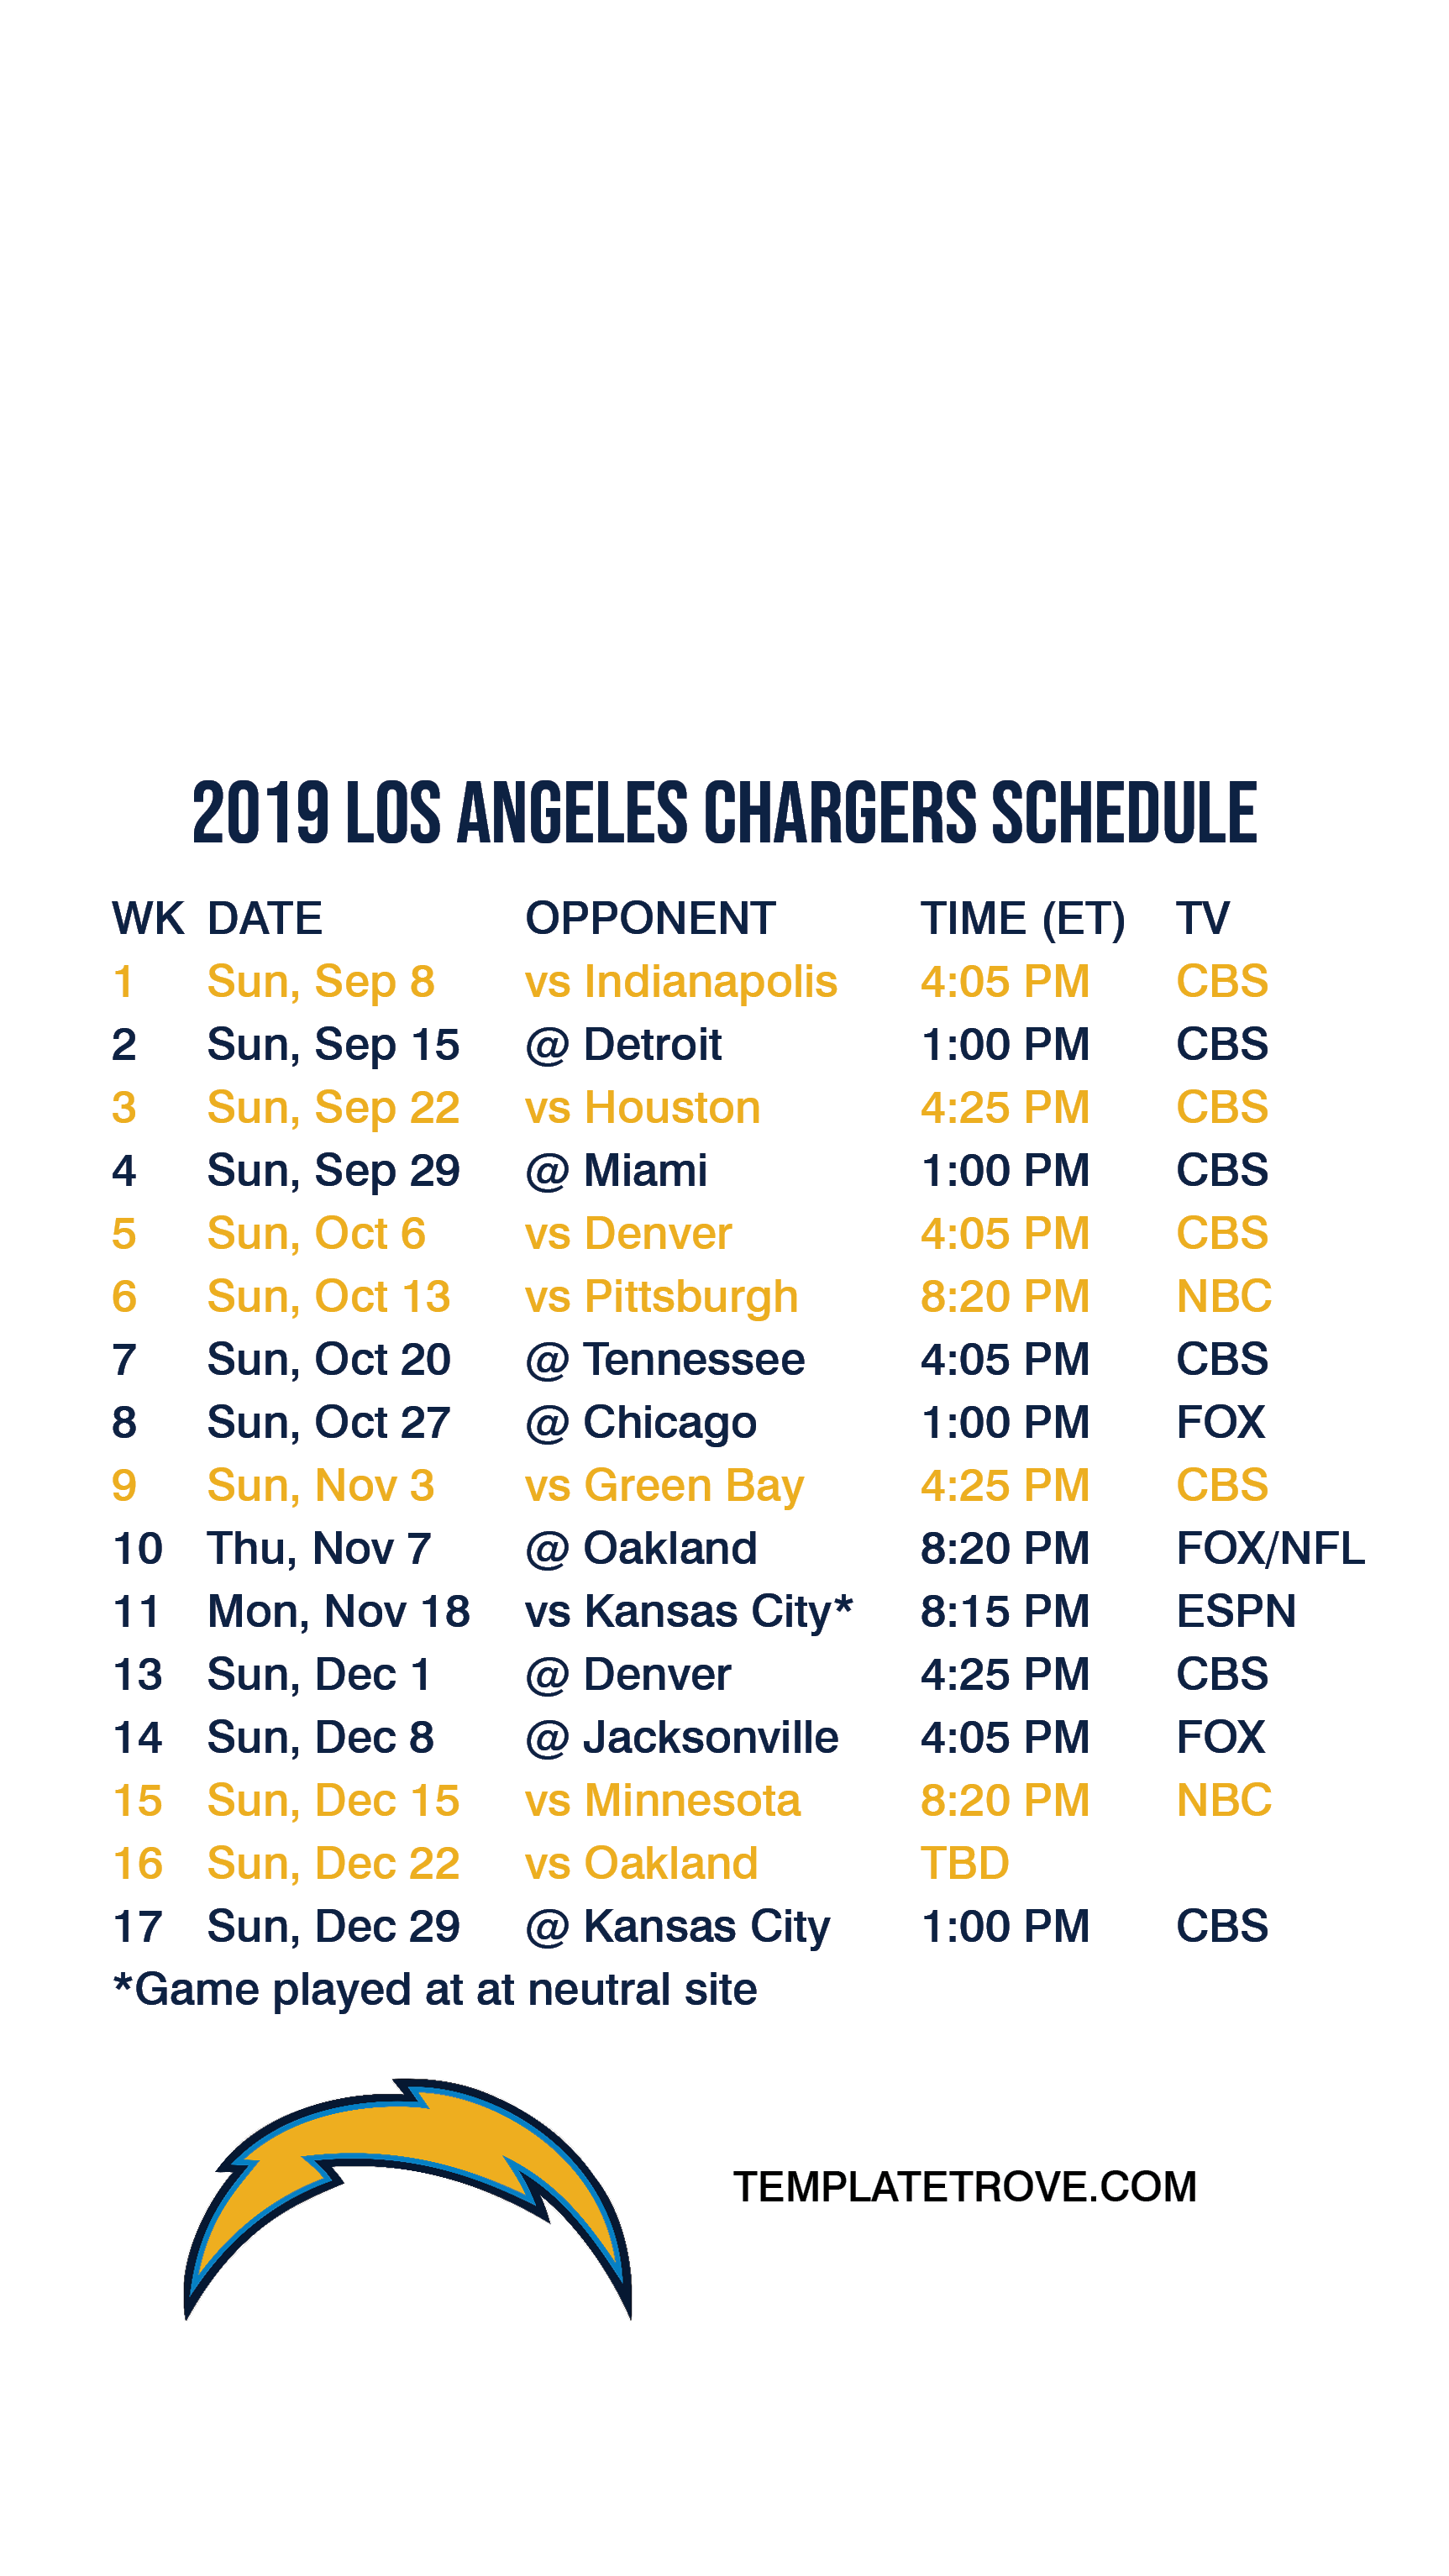 2019 2020 Los Angeles Chargers Lock Screen Schedule For IPhone 6 7 8